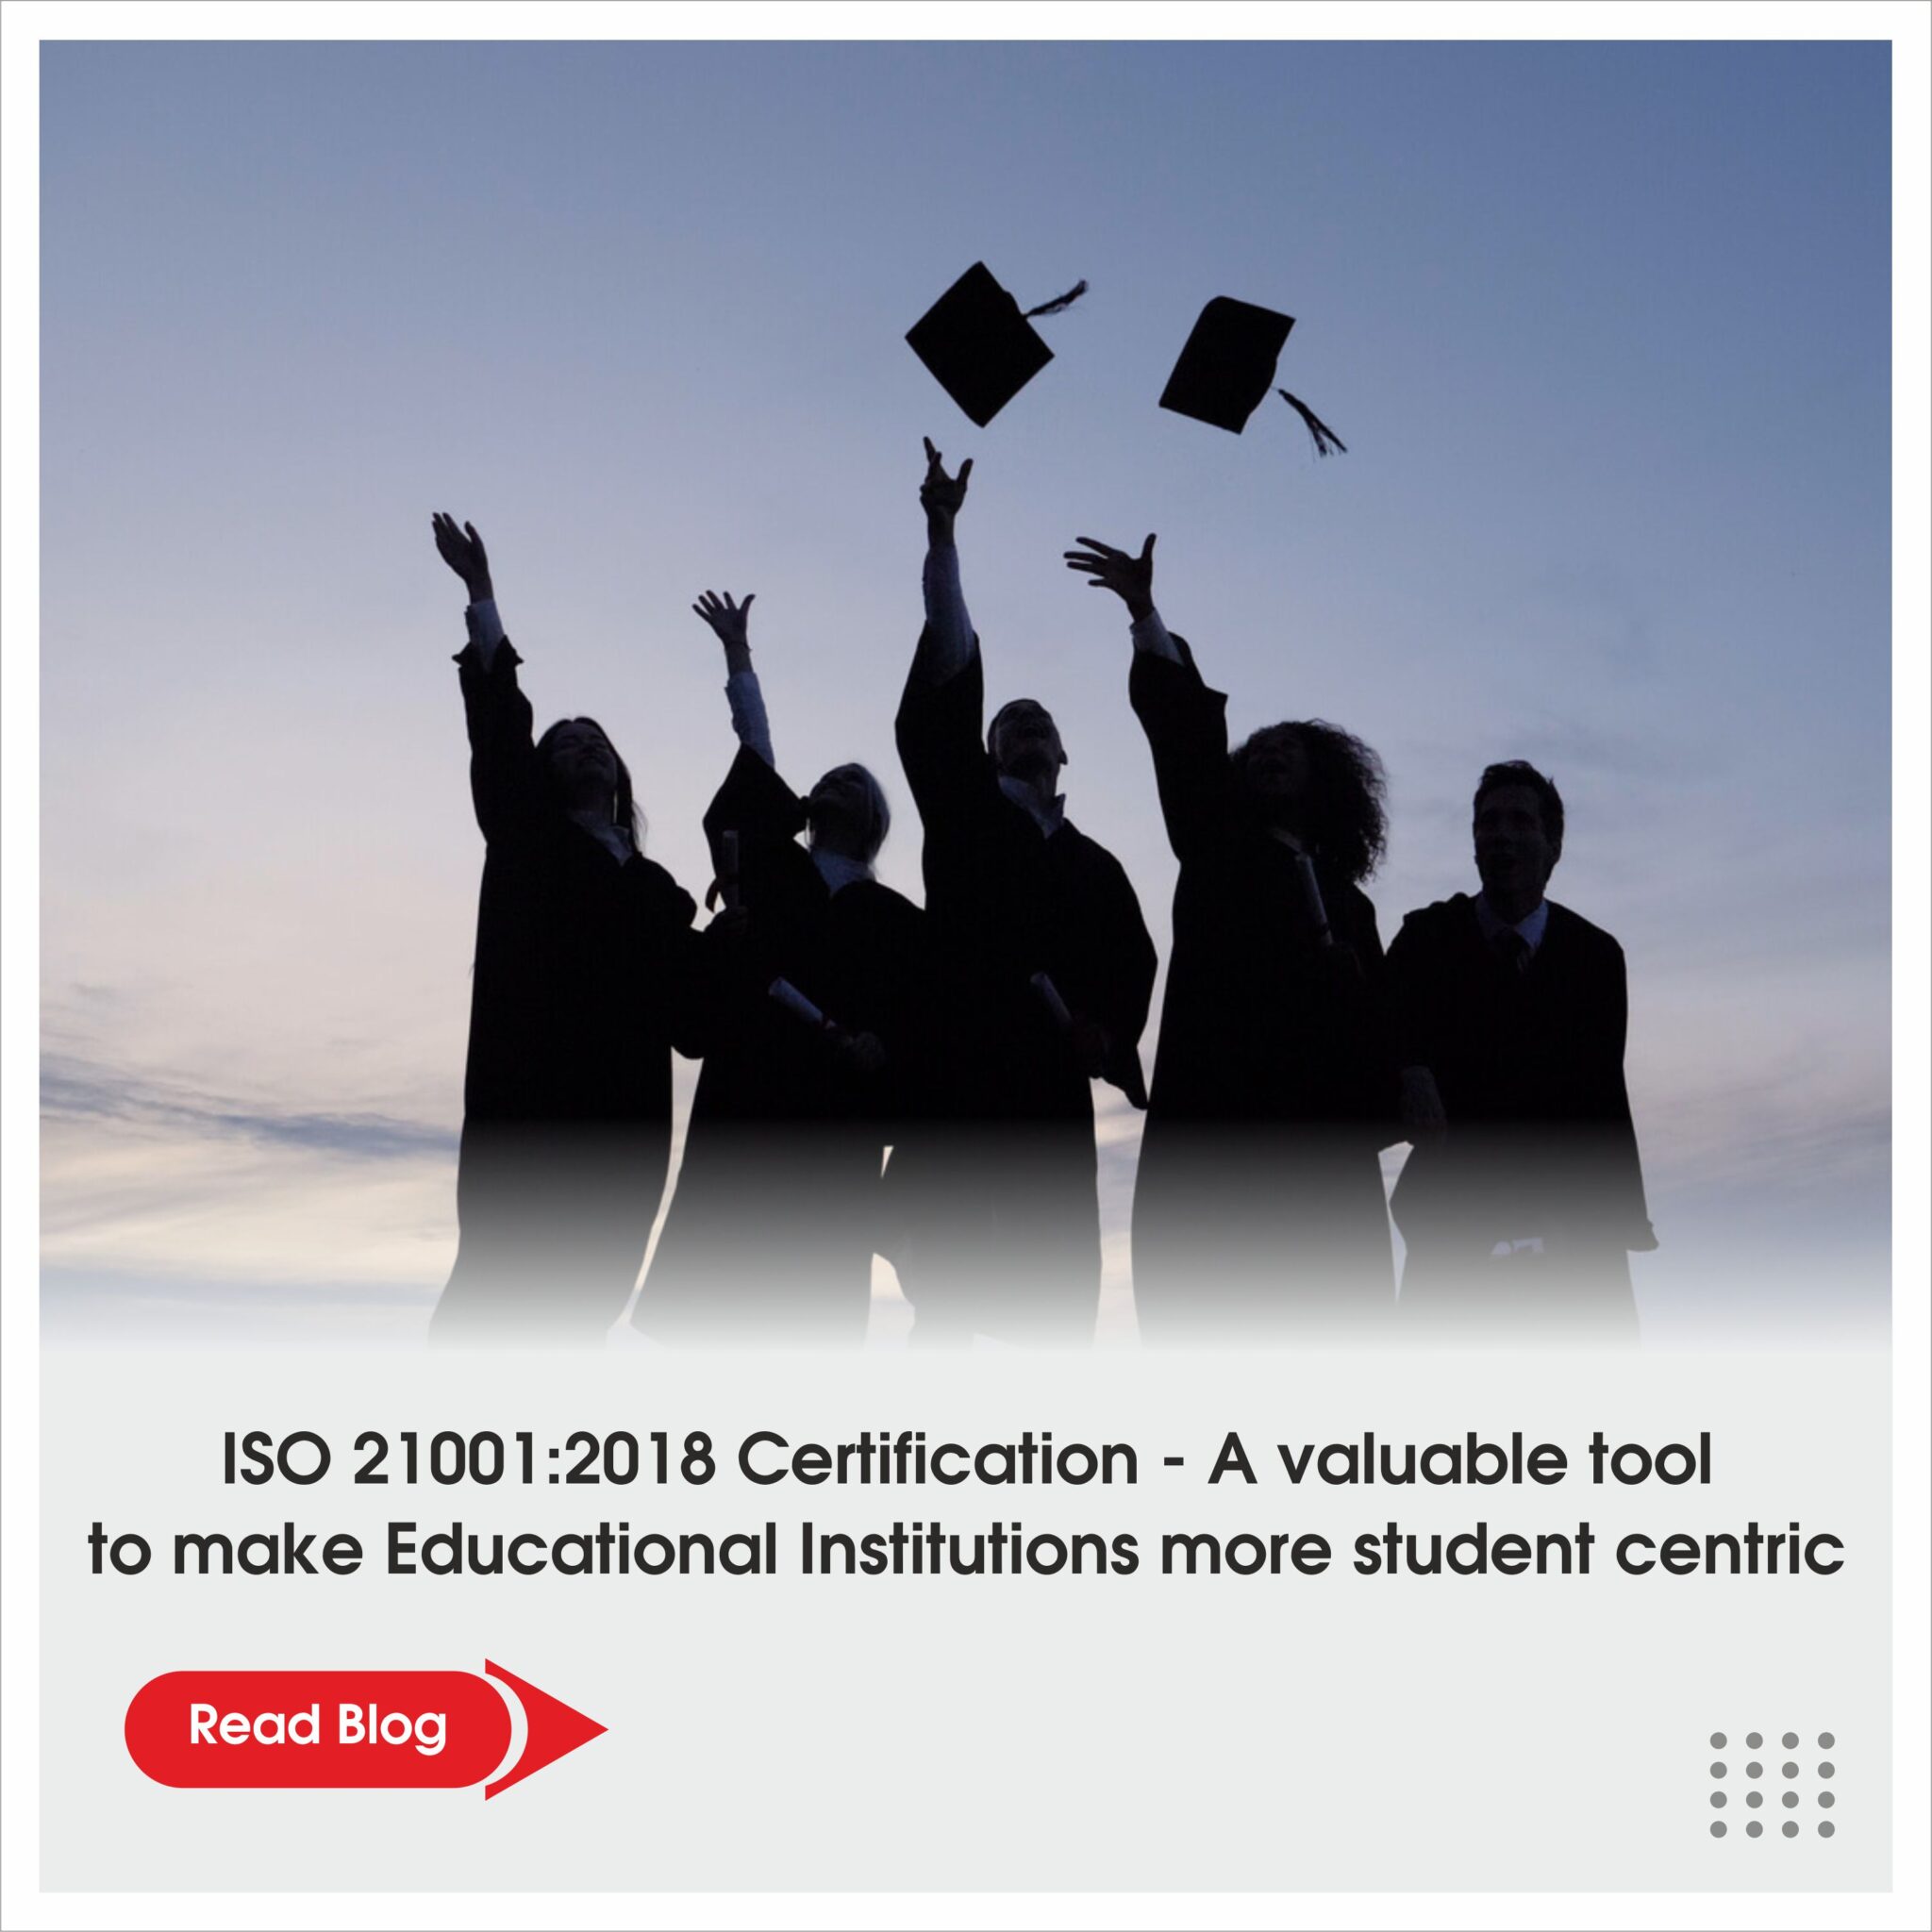 ISO 21001:2018 Certification – A valuable tool to make Educational Institutions more student centric